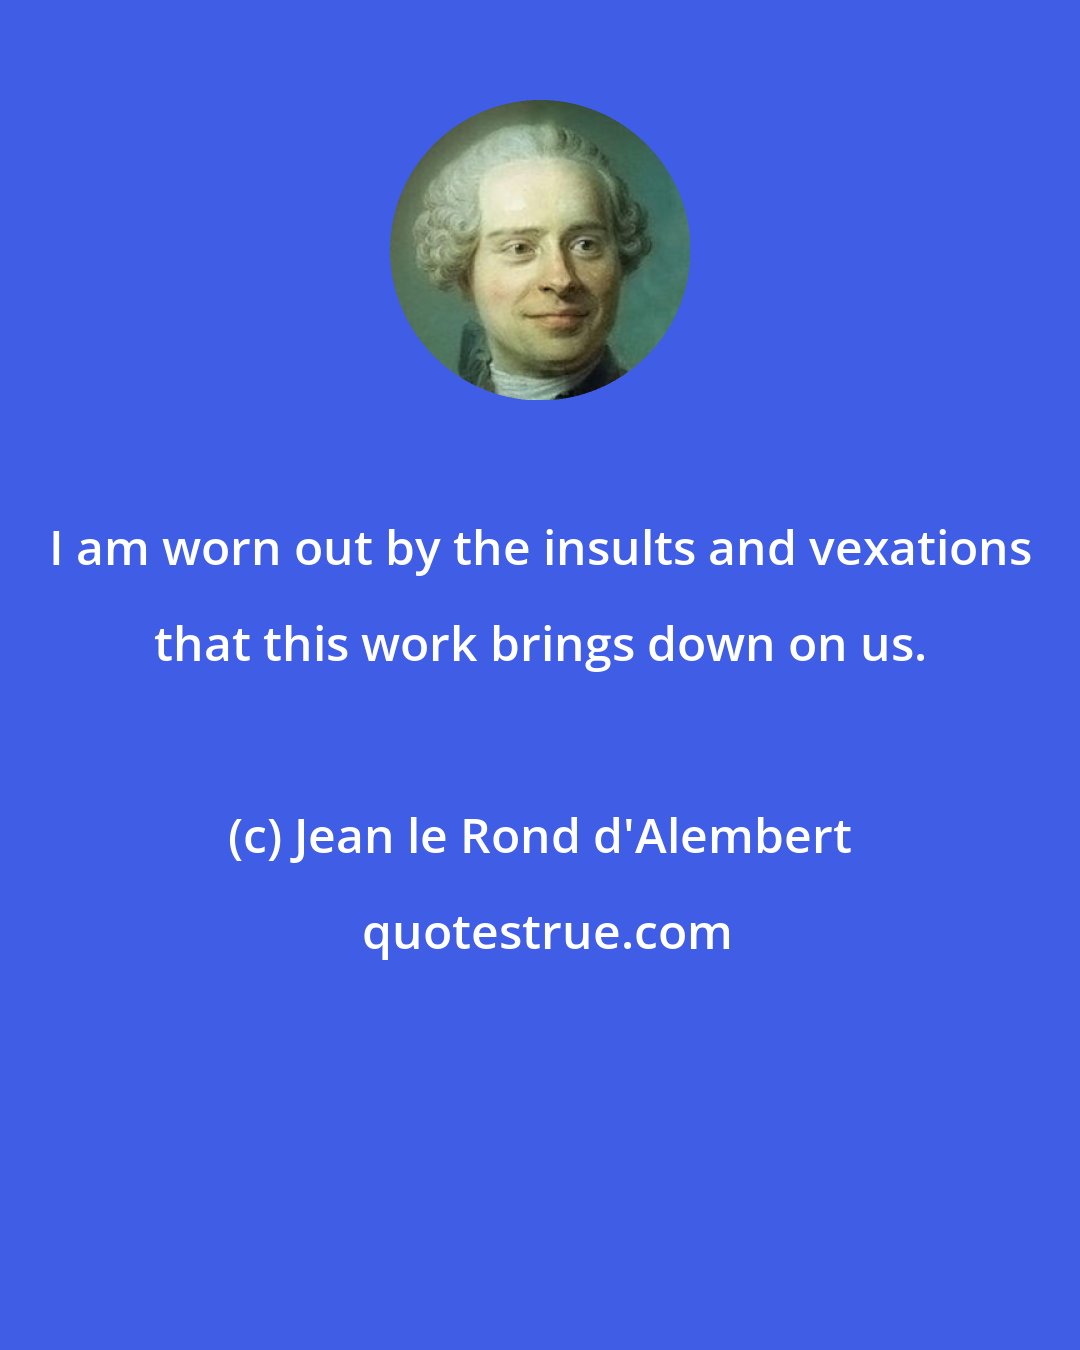 Jean le Rond d'Alembert: I am worn out by the insults and vexations that this work brings down on us.